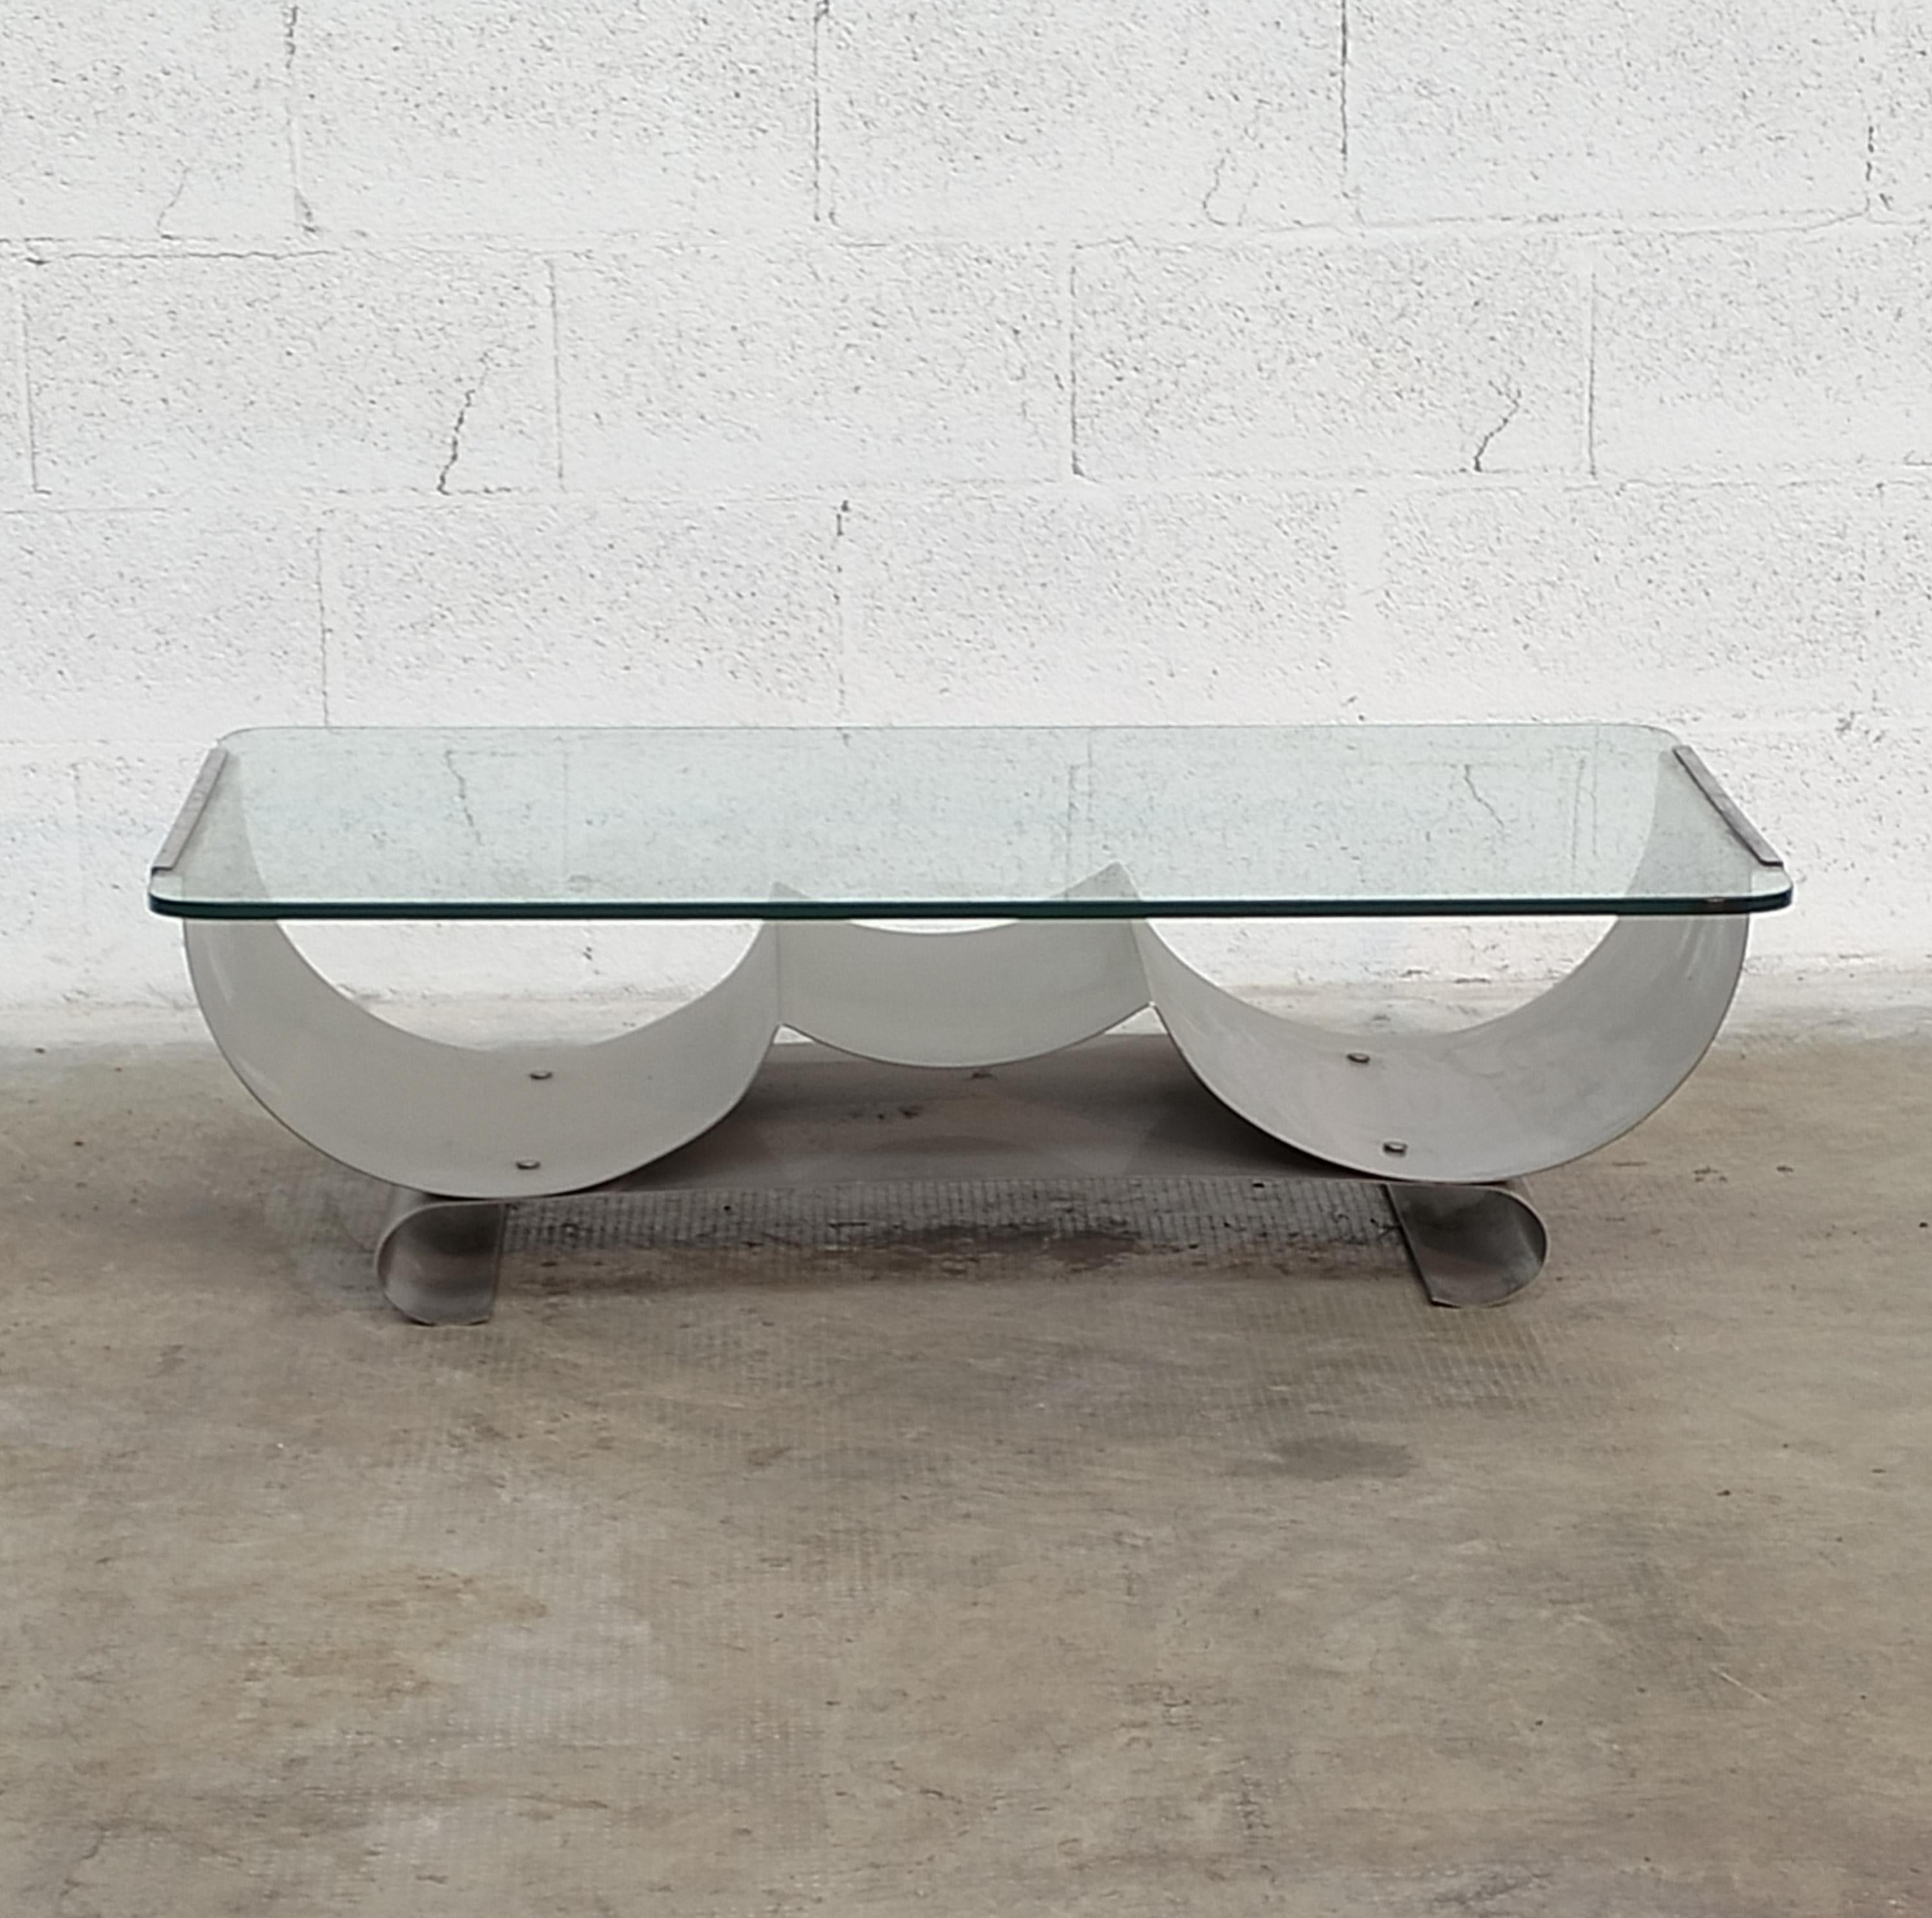 Mid-Century Modern Stainless Steel and Glass Coffee Table by Francois Monnet for Kappa 70s